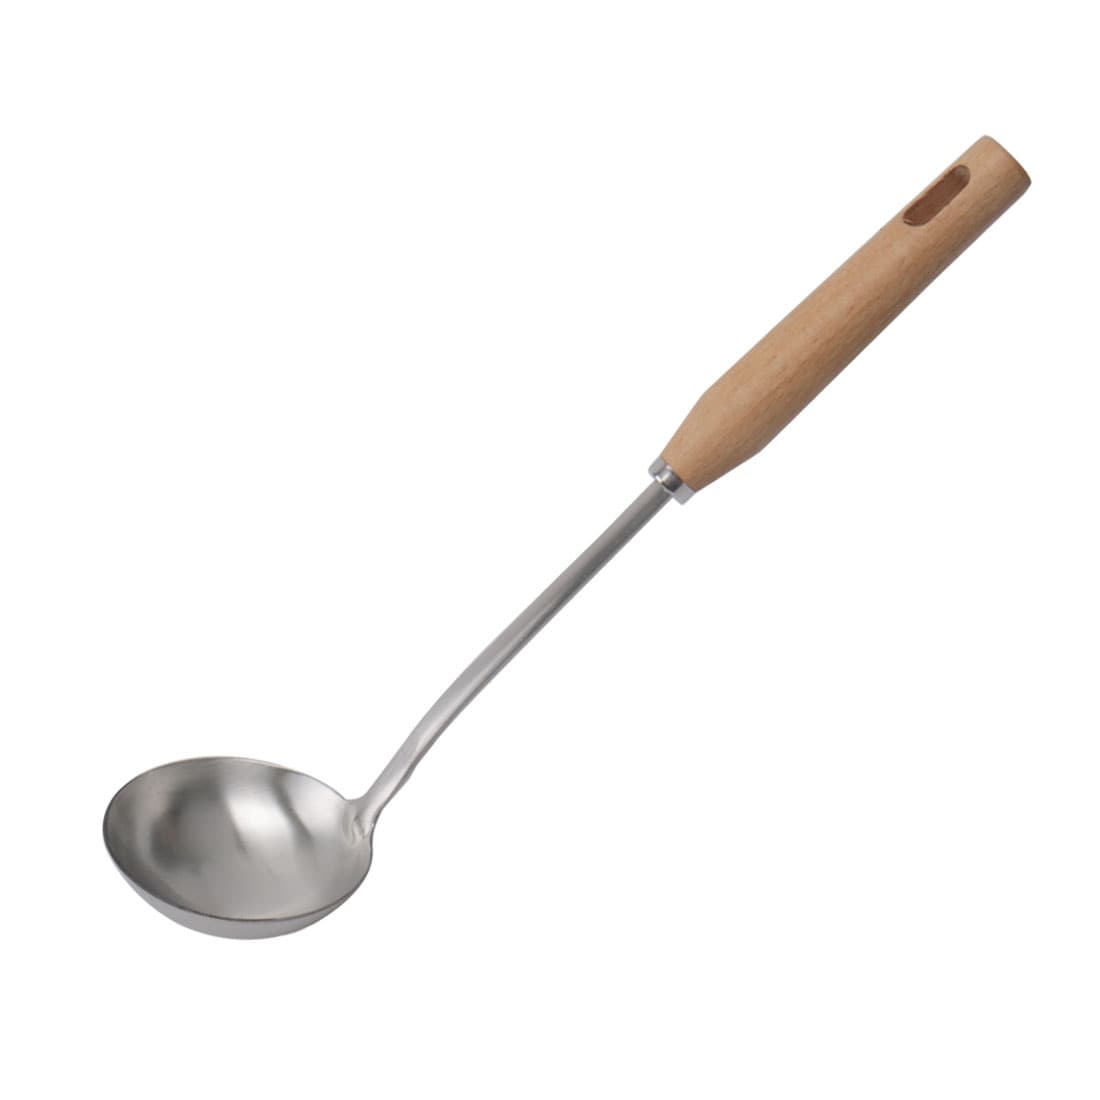 https://ak1.ostkcdn.com/images/products/is/images/direct/2e24599fcdc8a954279bd02d8fda2059324b8917/Stainless-Steel-Soup-Ladle-Spoon-Wooden-Handle-Restaurant-Kitchen-Cookware-Utensil-for-Making-Gruel-Milk-Porridge-Silver-Tone.jpg